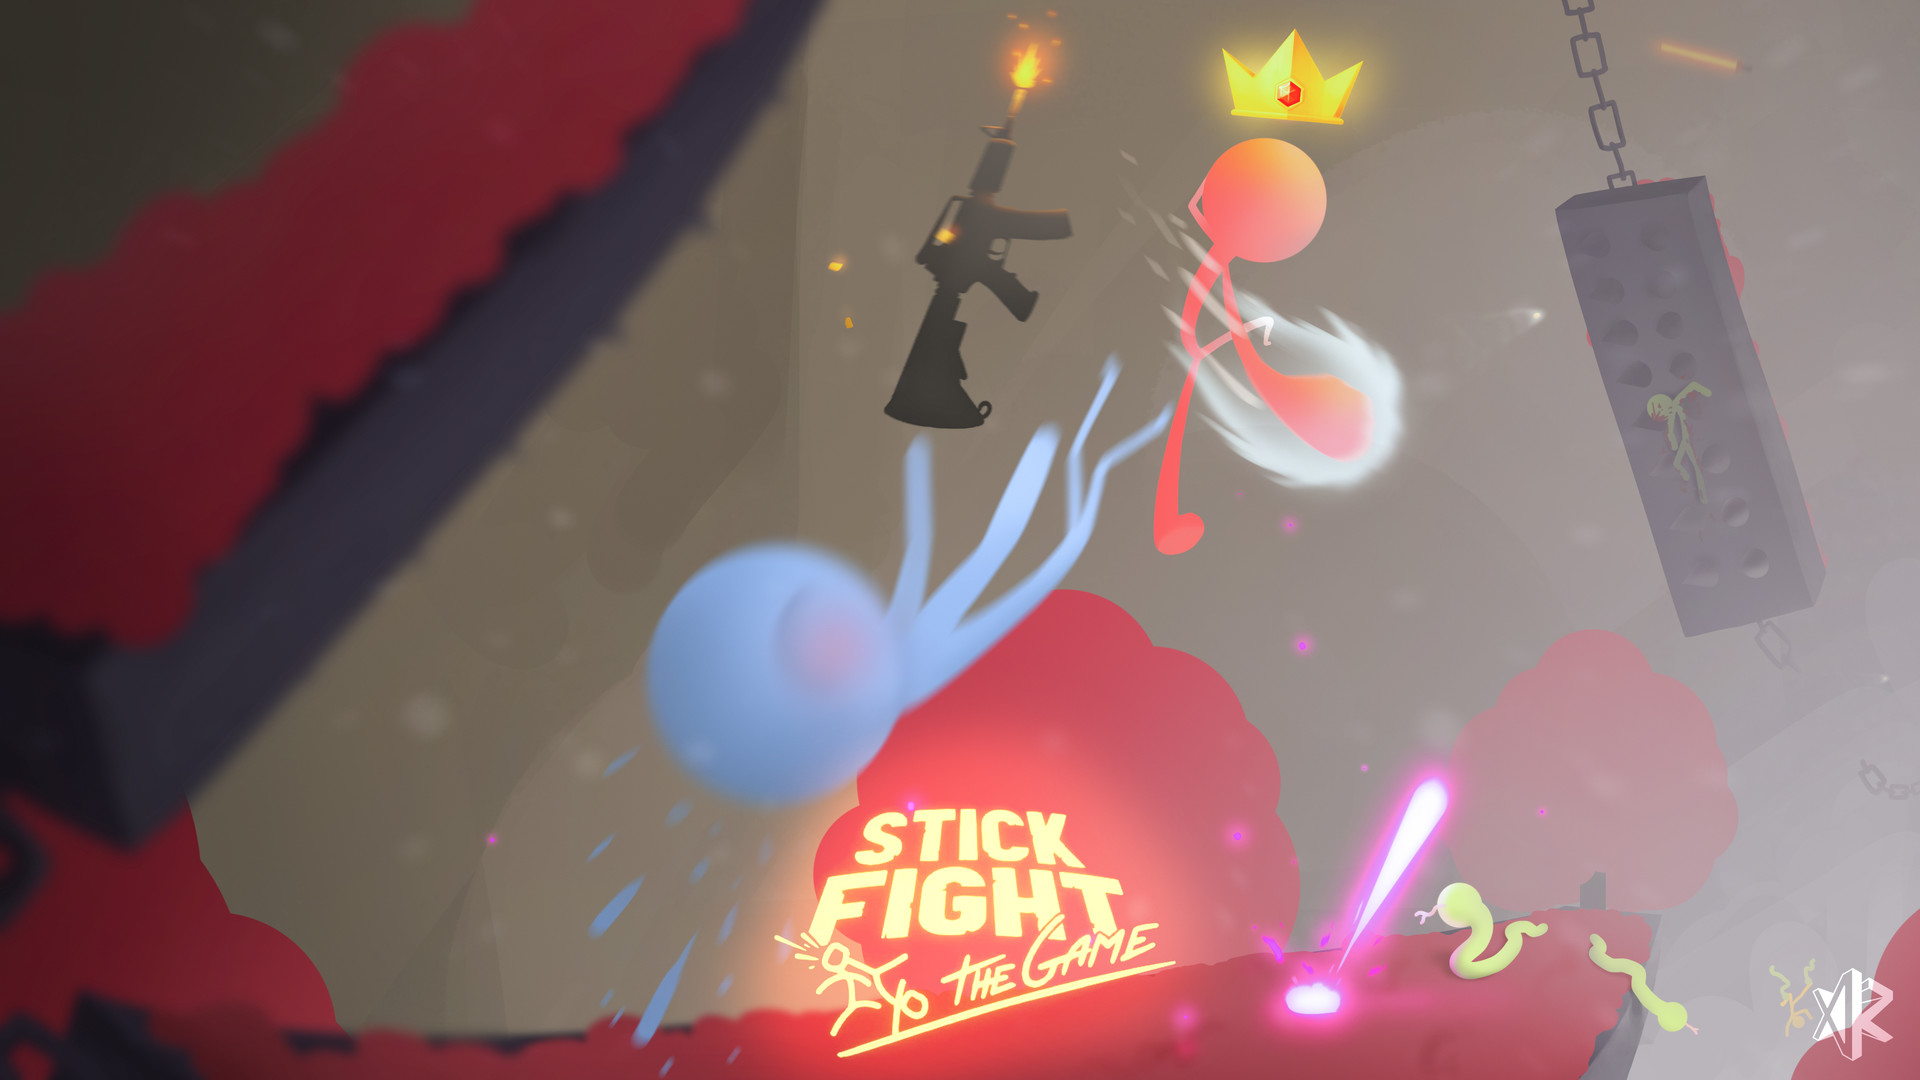 ArtStation - Stick Fight:The Game